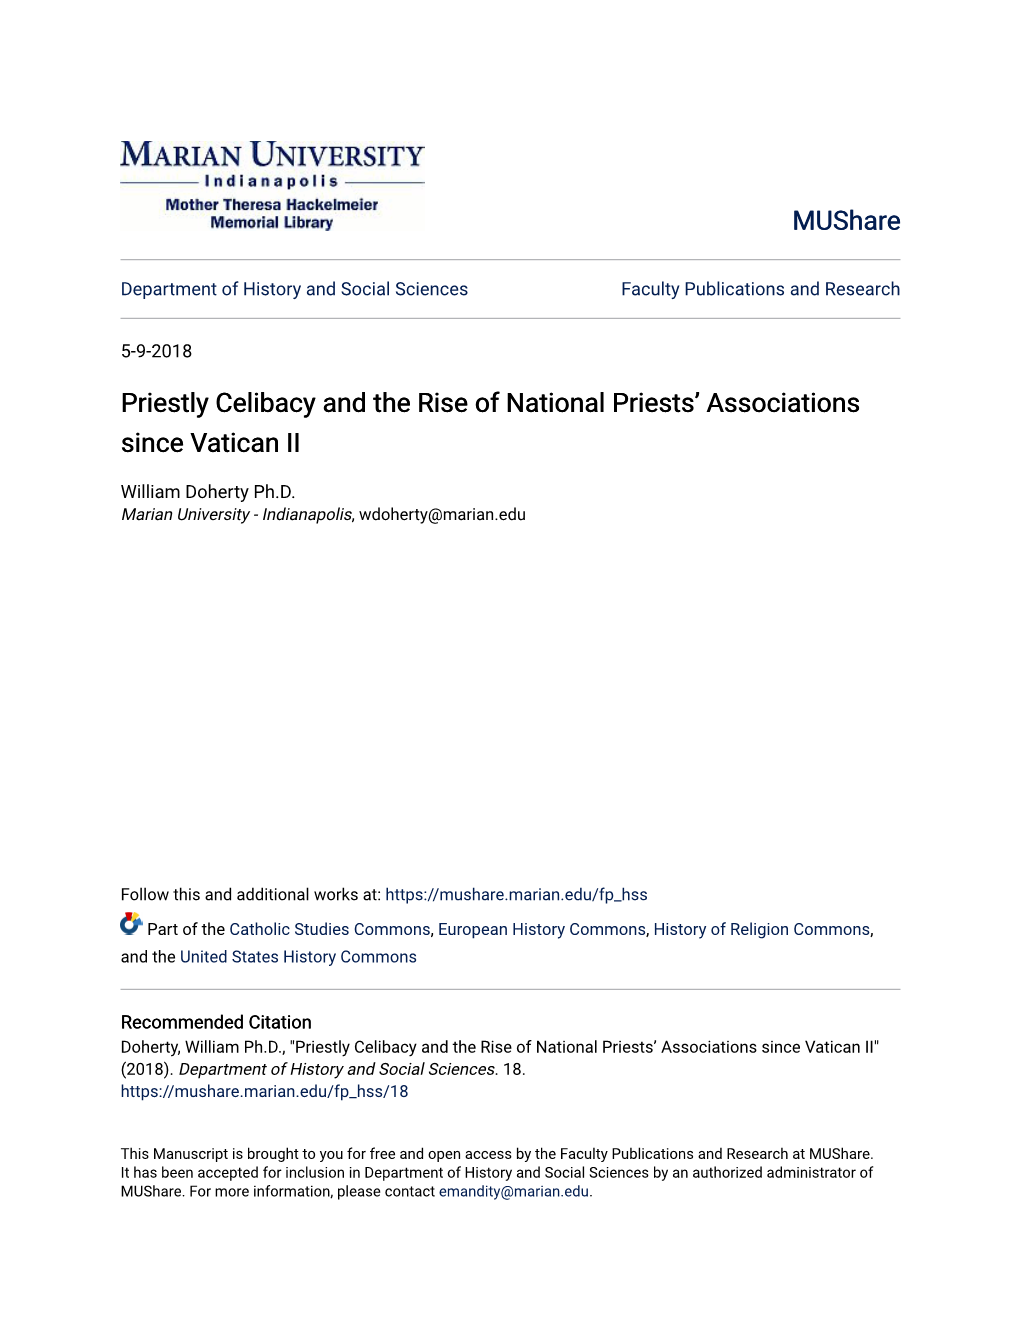 Priestly Celibacy and the Rise of National Priests' Associations Since Vatican II